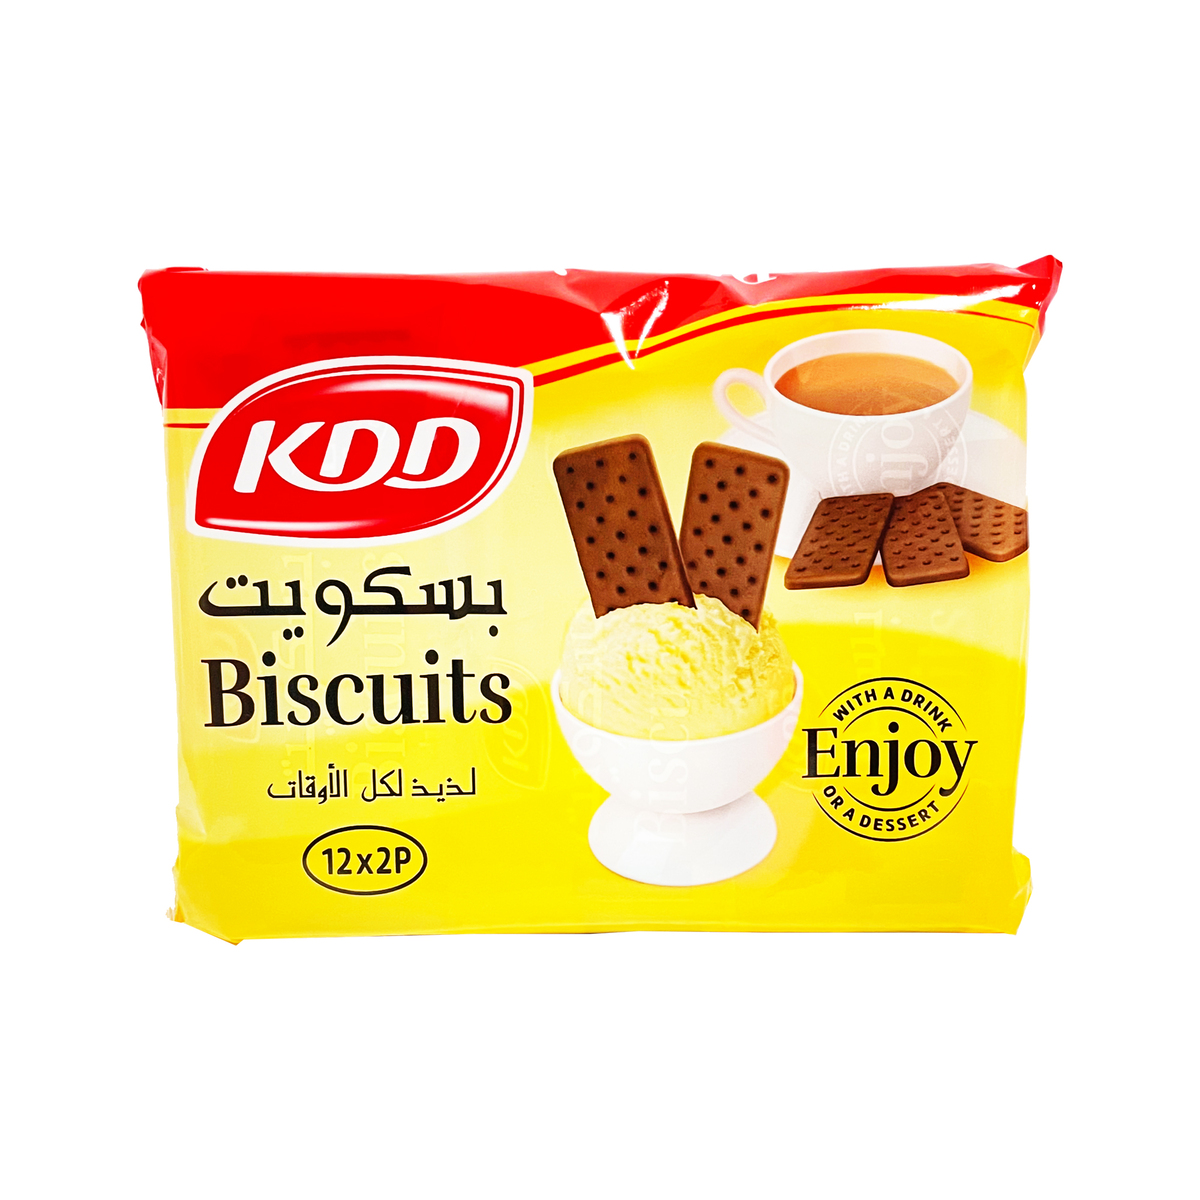 KDD Biscuits 12pcs